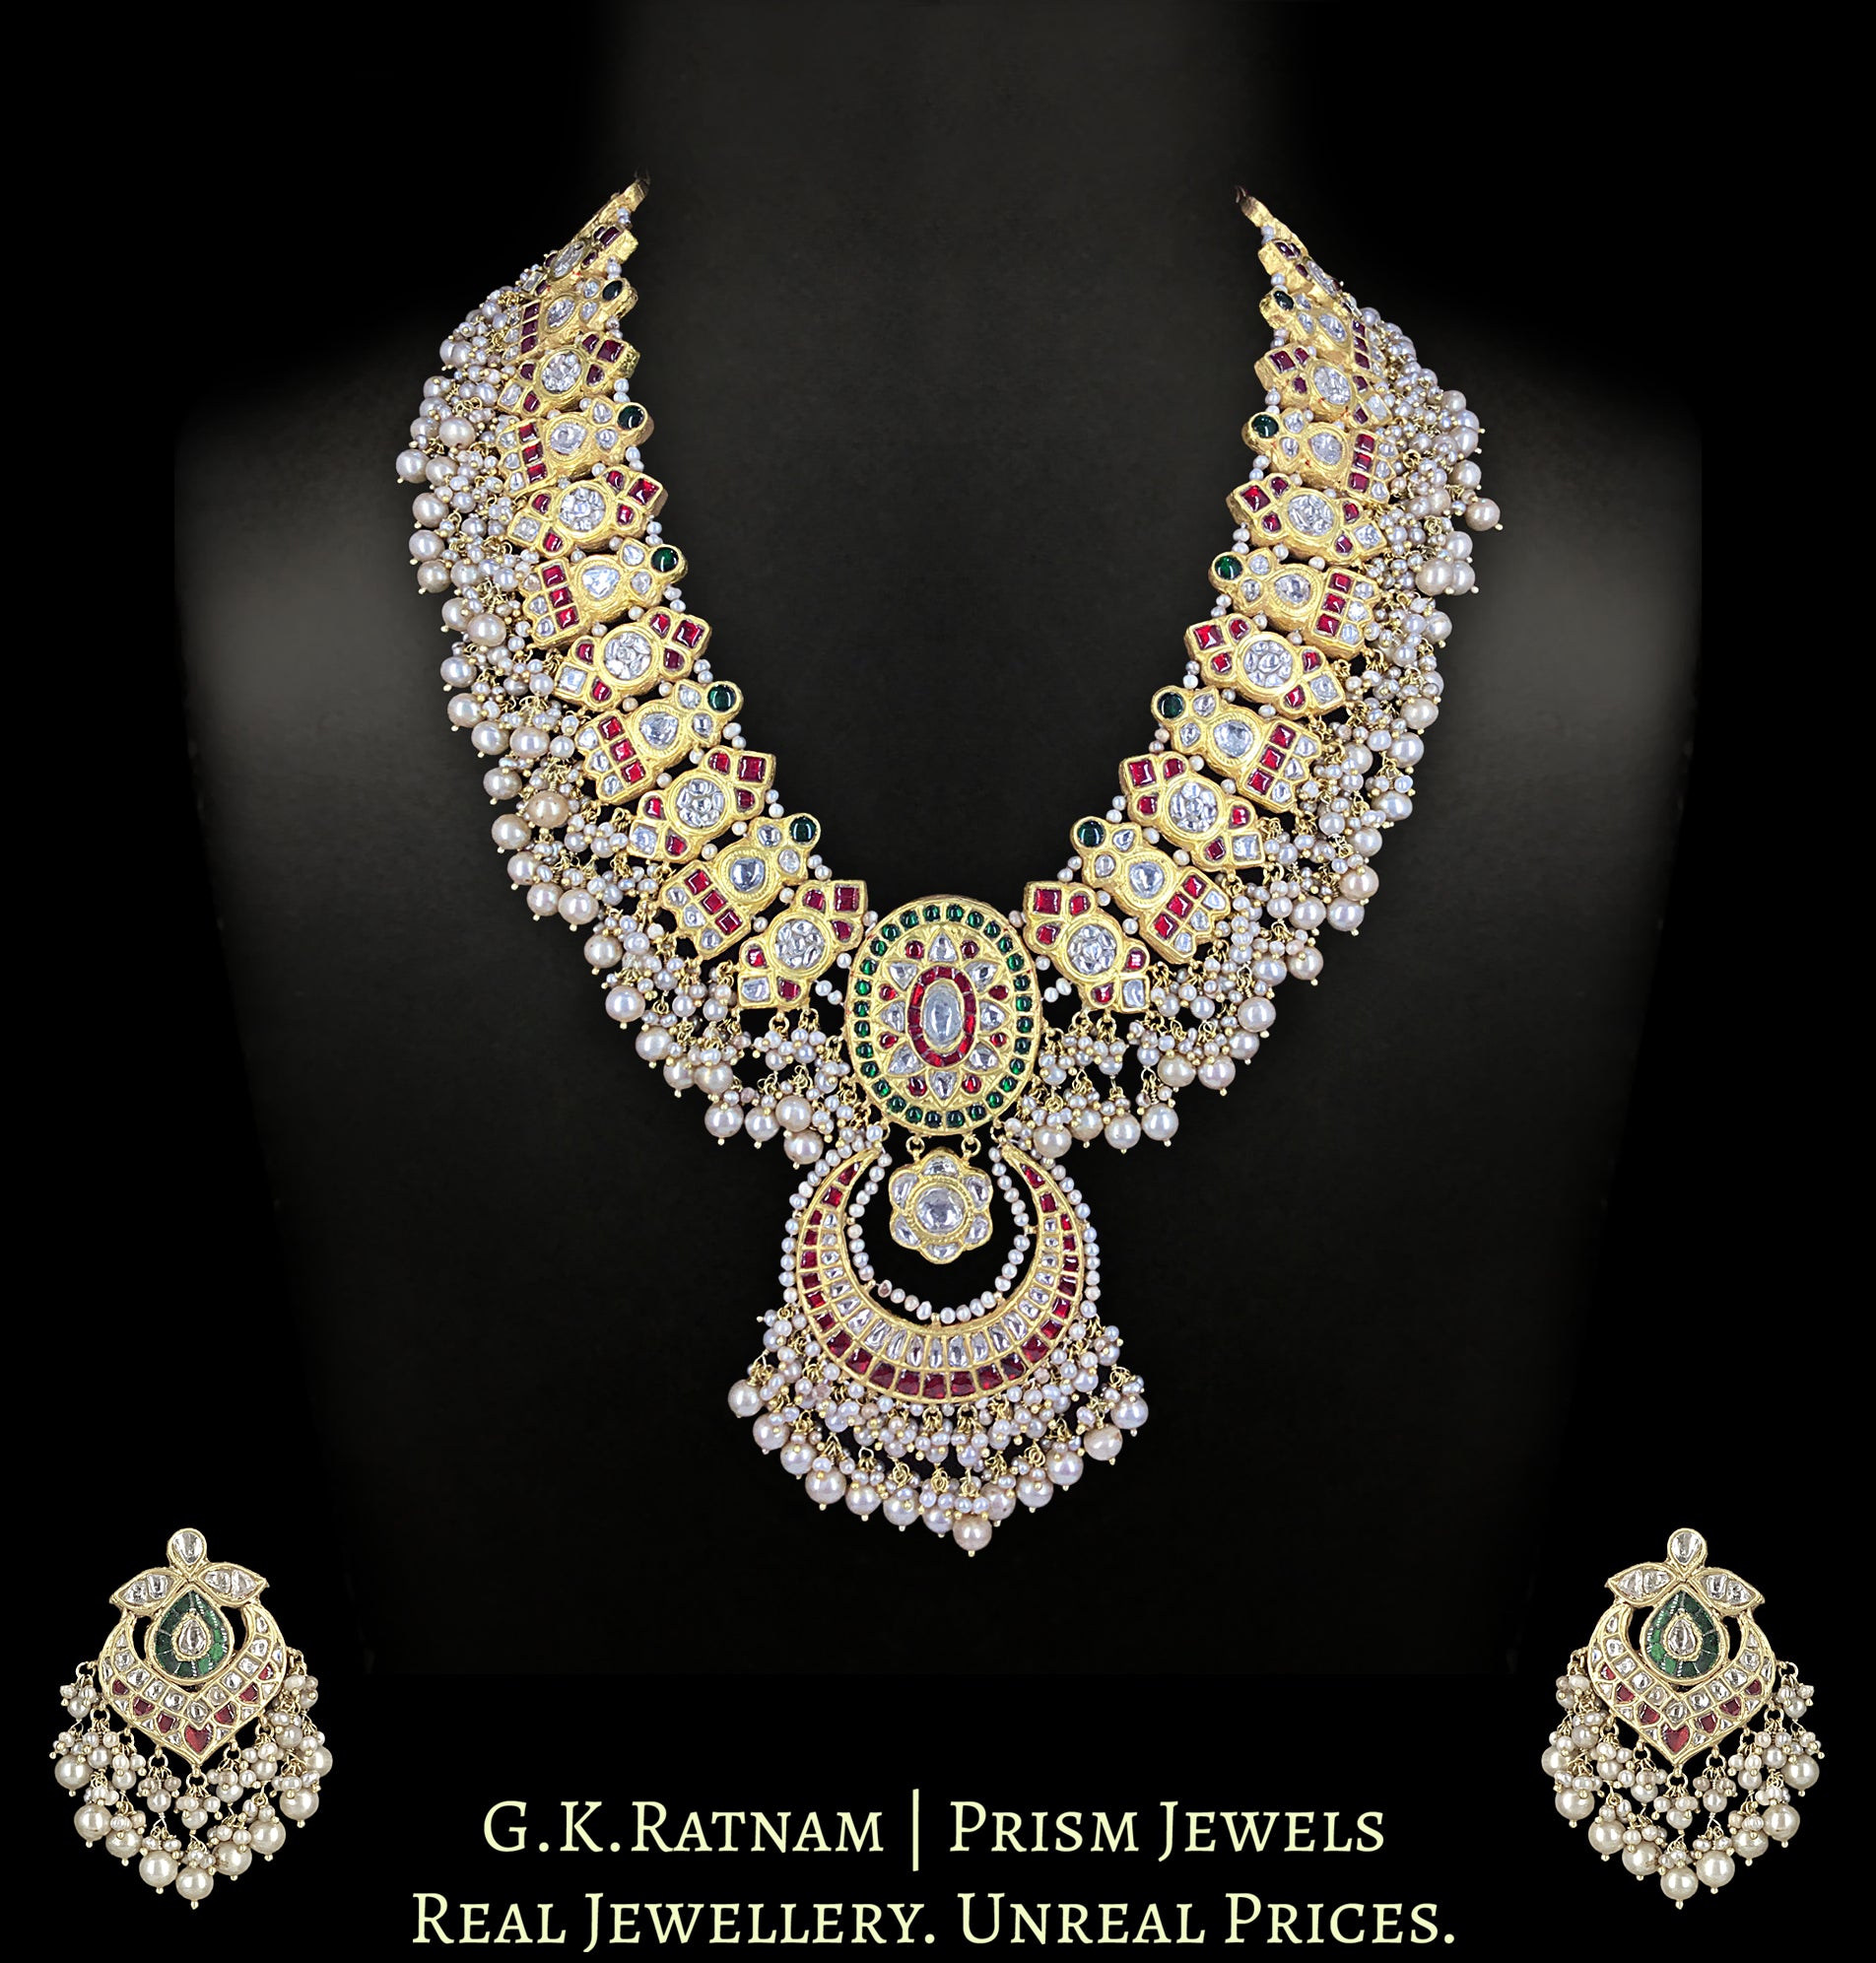 23k Gold and Diamond Polki south-style Long Necklace Set with basra-like Freshwater Pearls